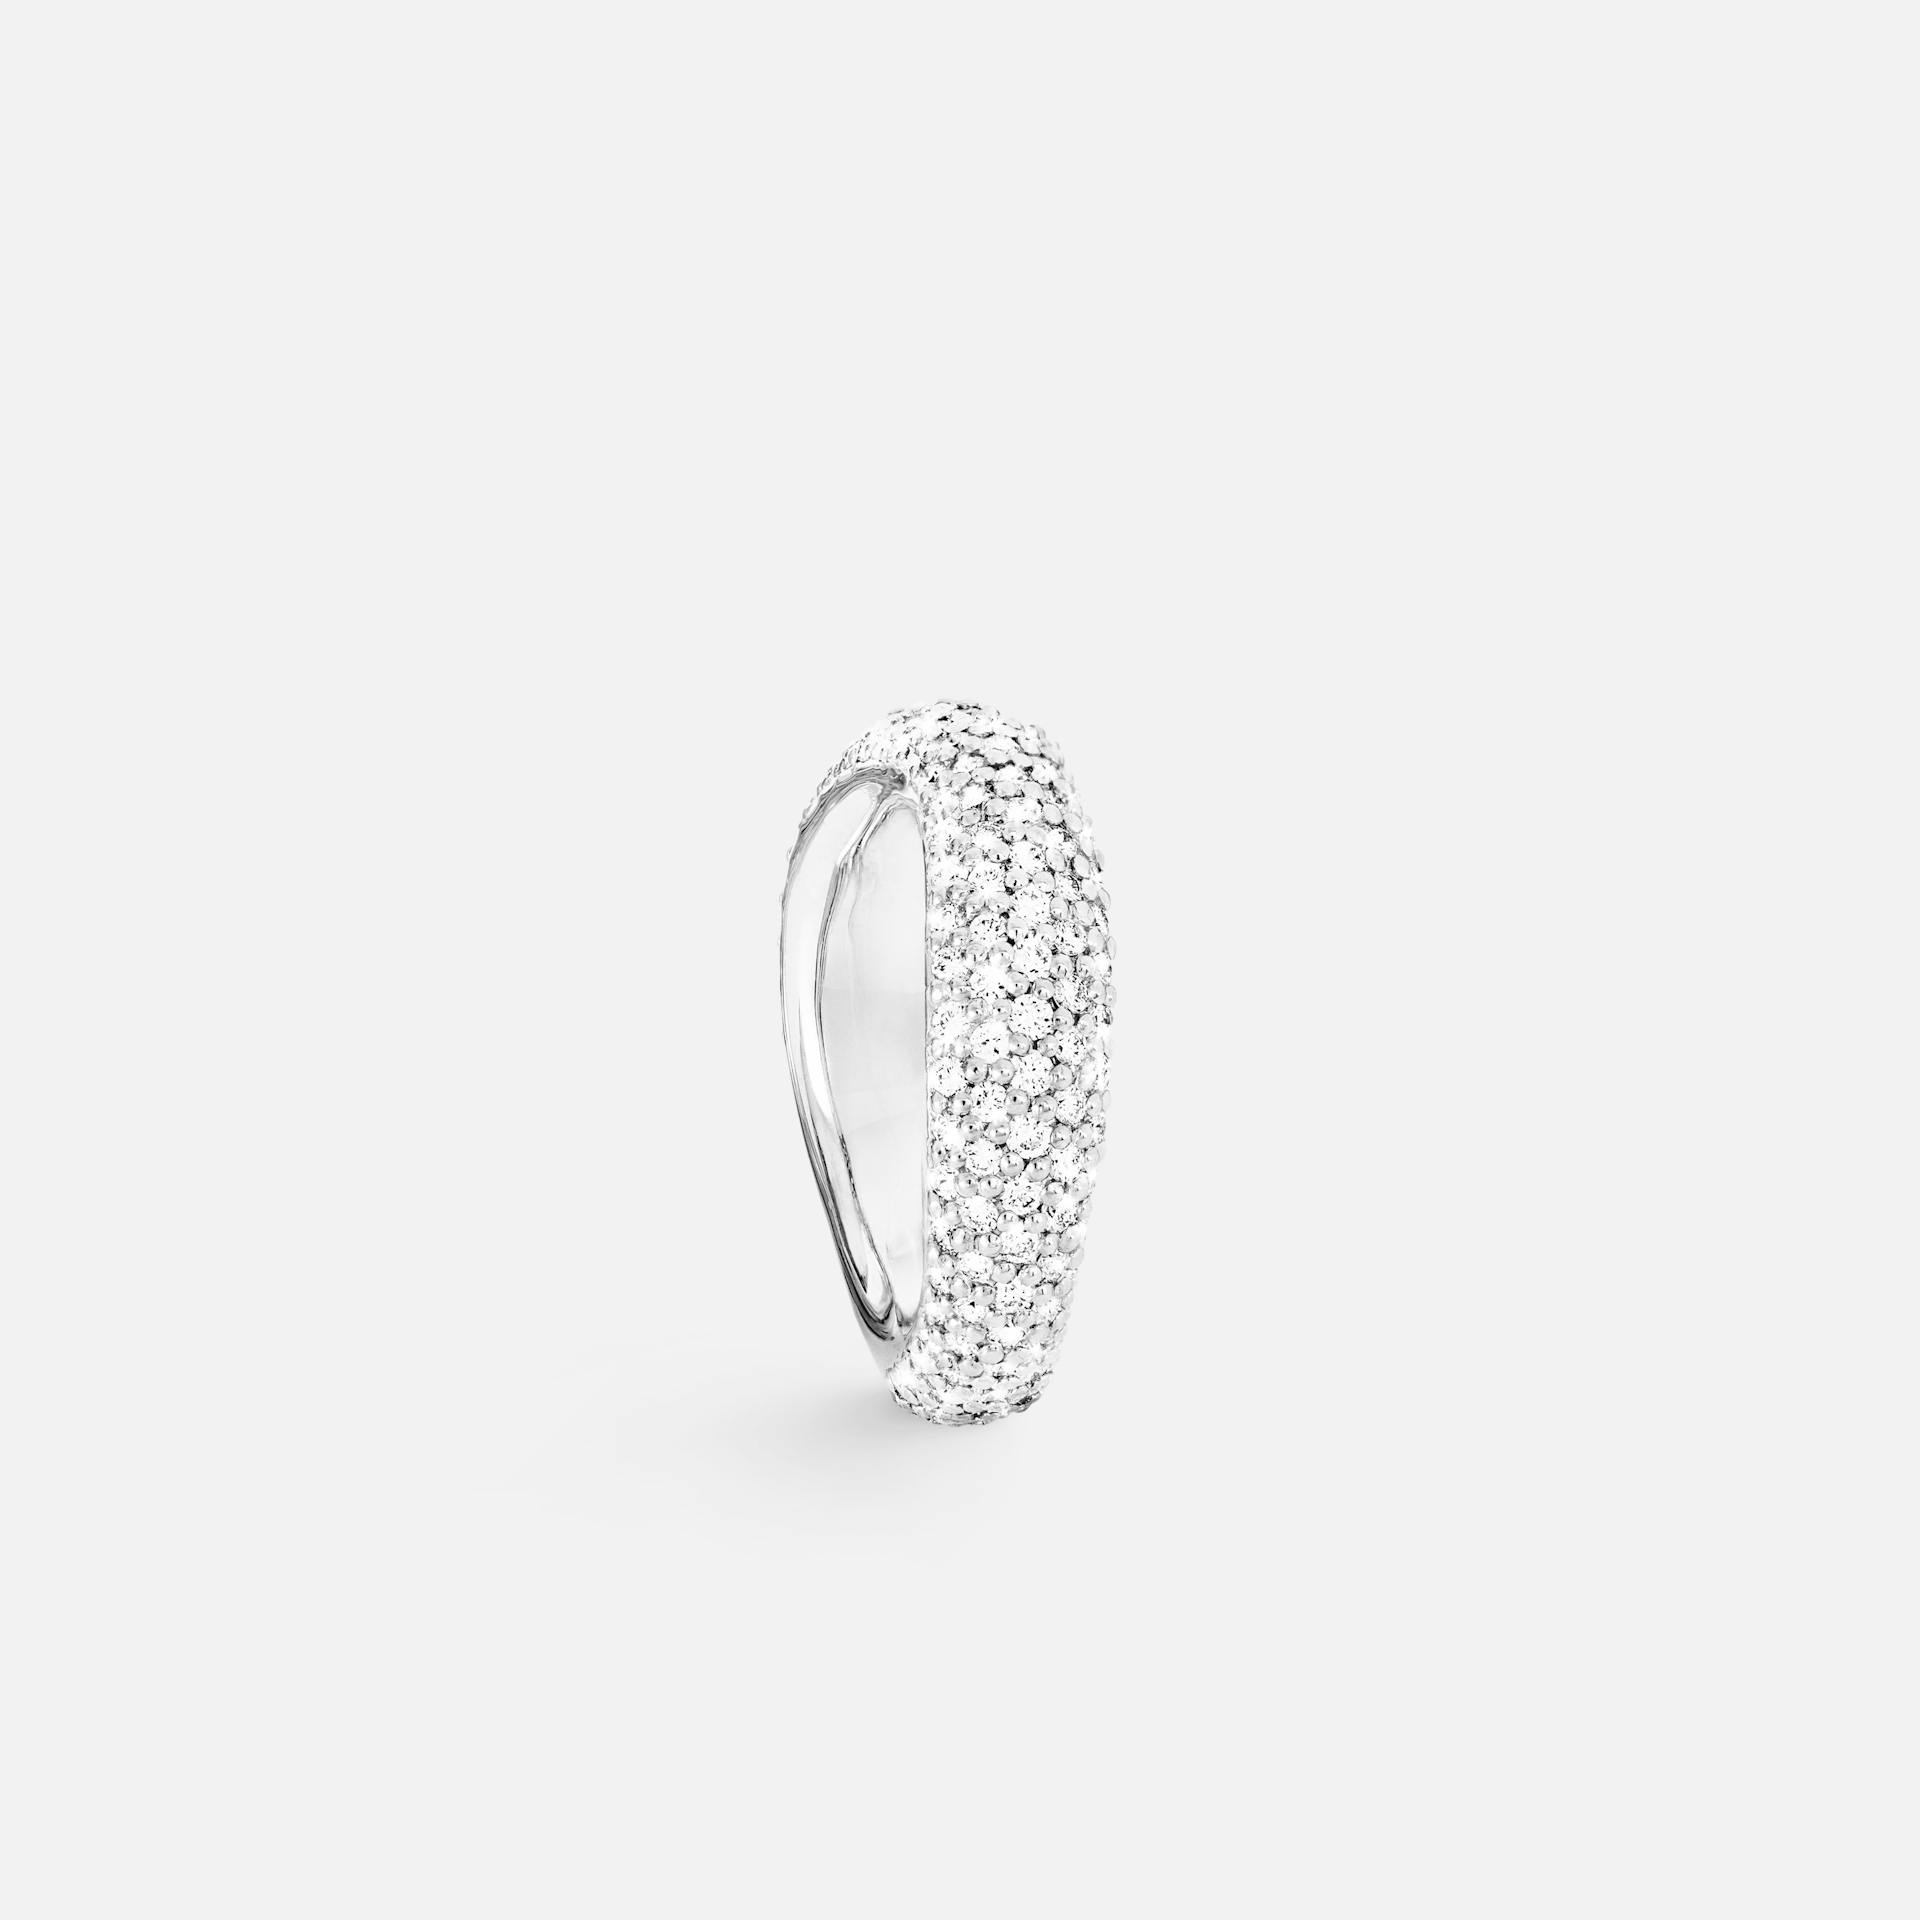 Love ring 5 18k white gold textured and diamonds 1.75 ct. TW. VS.